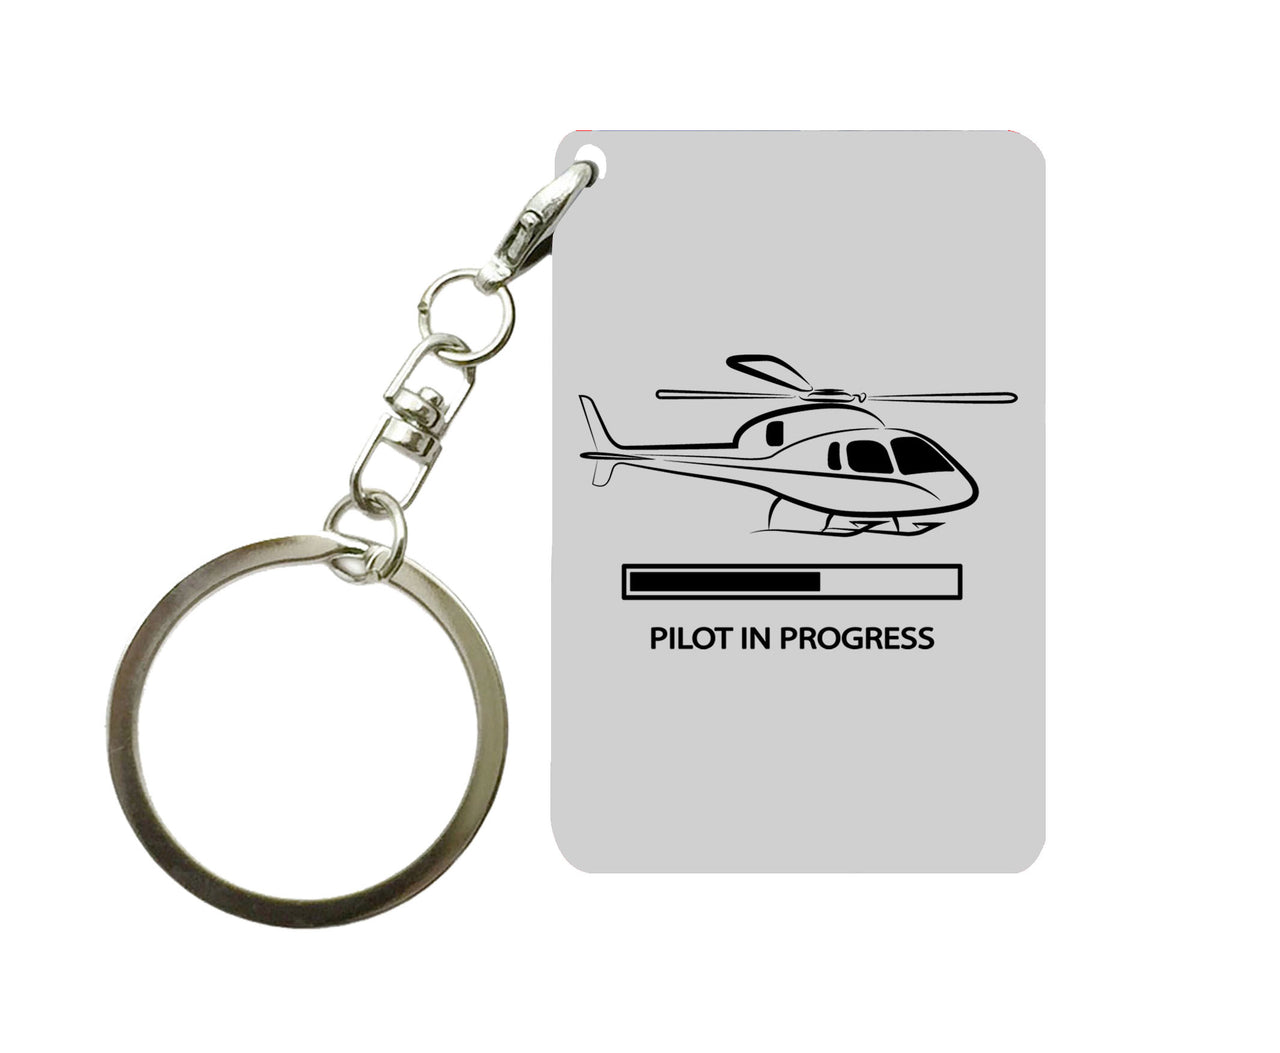 Pilot In Progress (Helicopter) Designed Key Chains